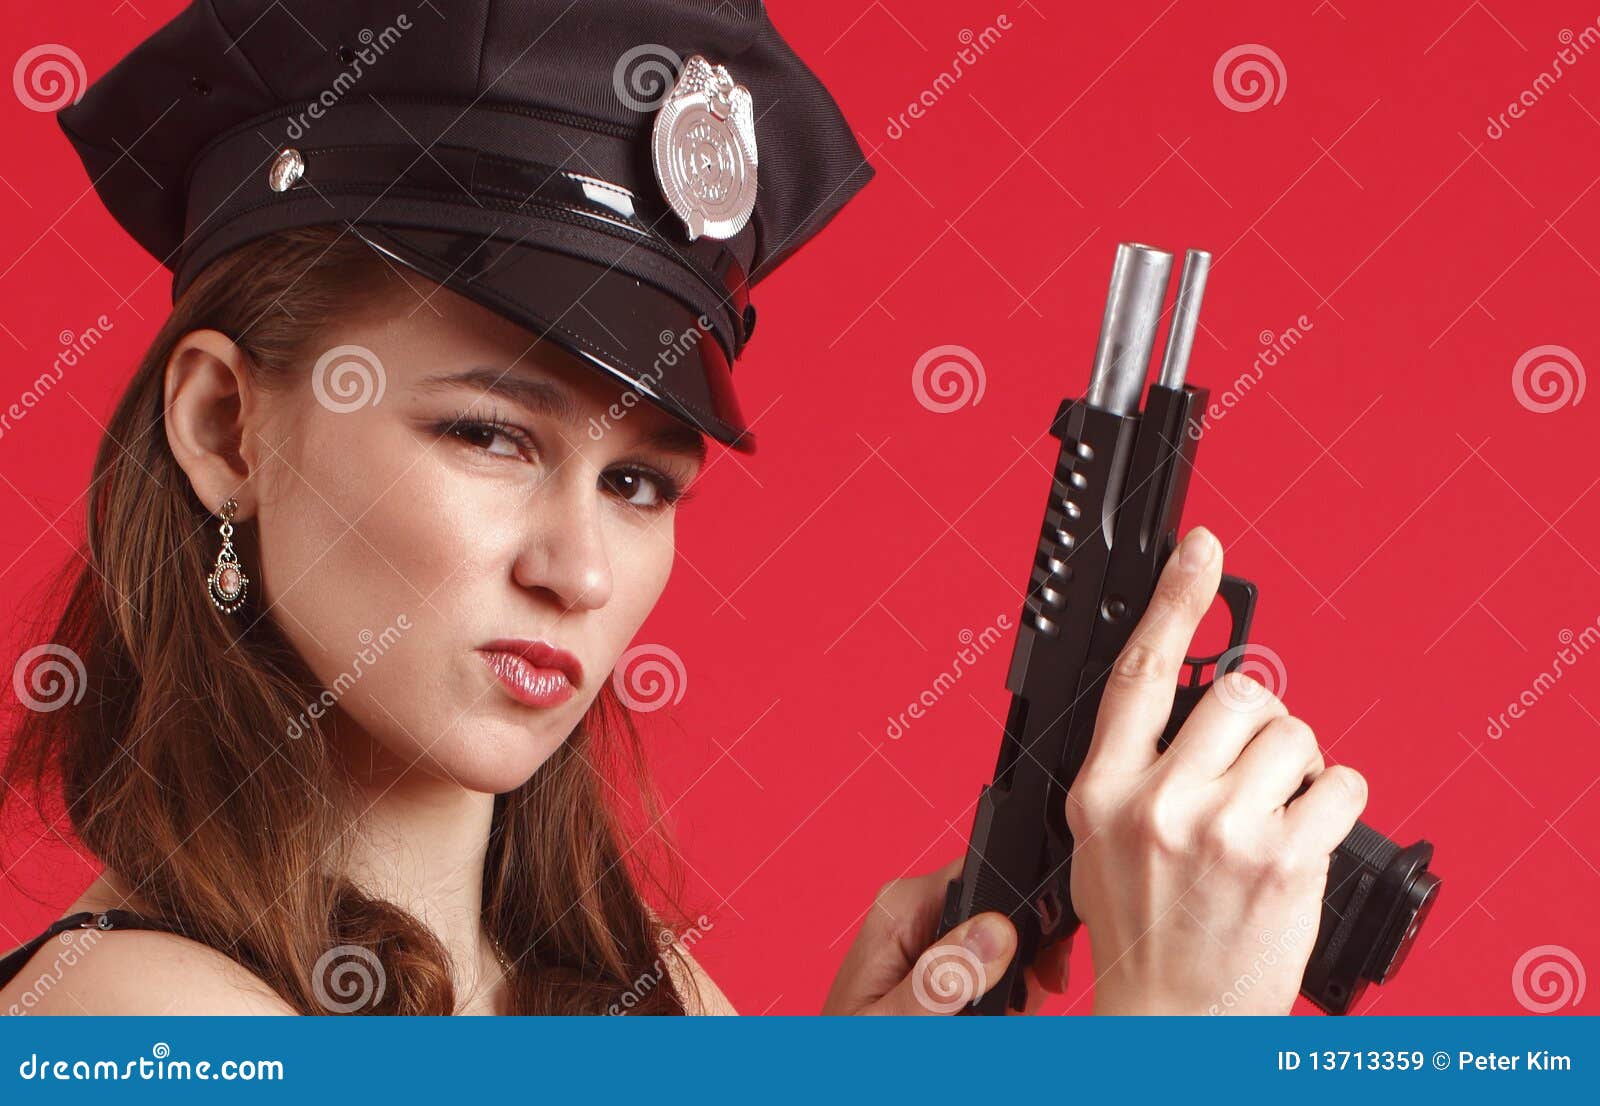 Sexy Female Police Officer Royalty Free Stock Images